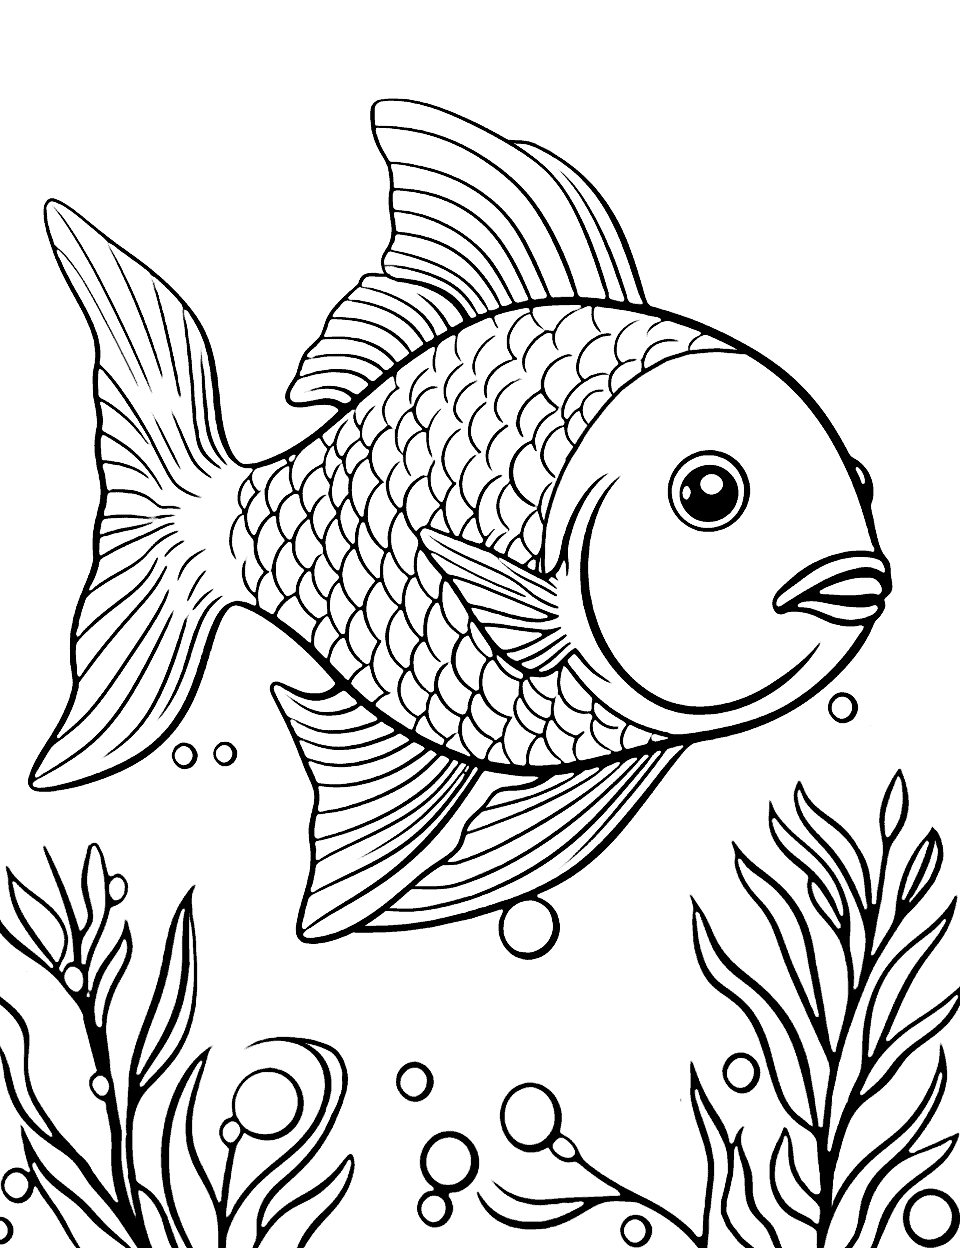 Jungle River Fish Coloring Page - Fish that are native to jungle rivers swimming amidst the foliage.